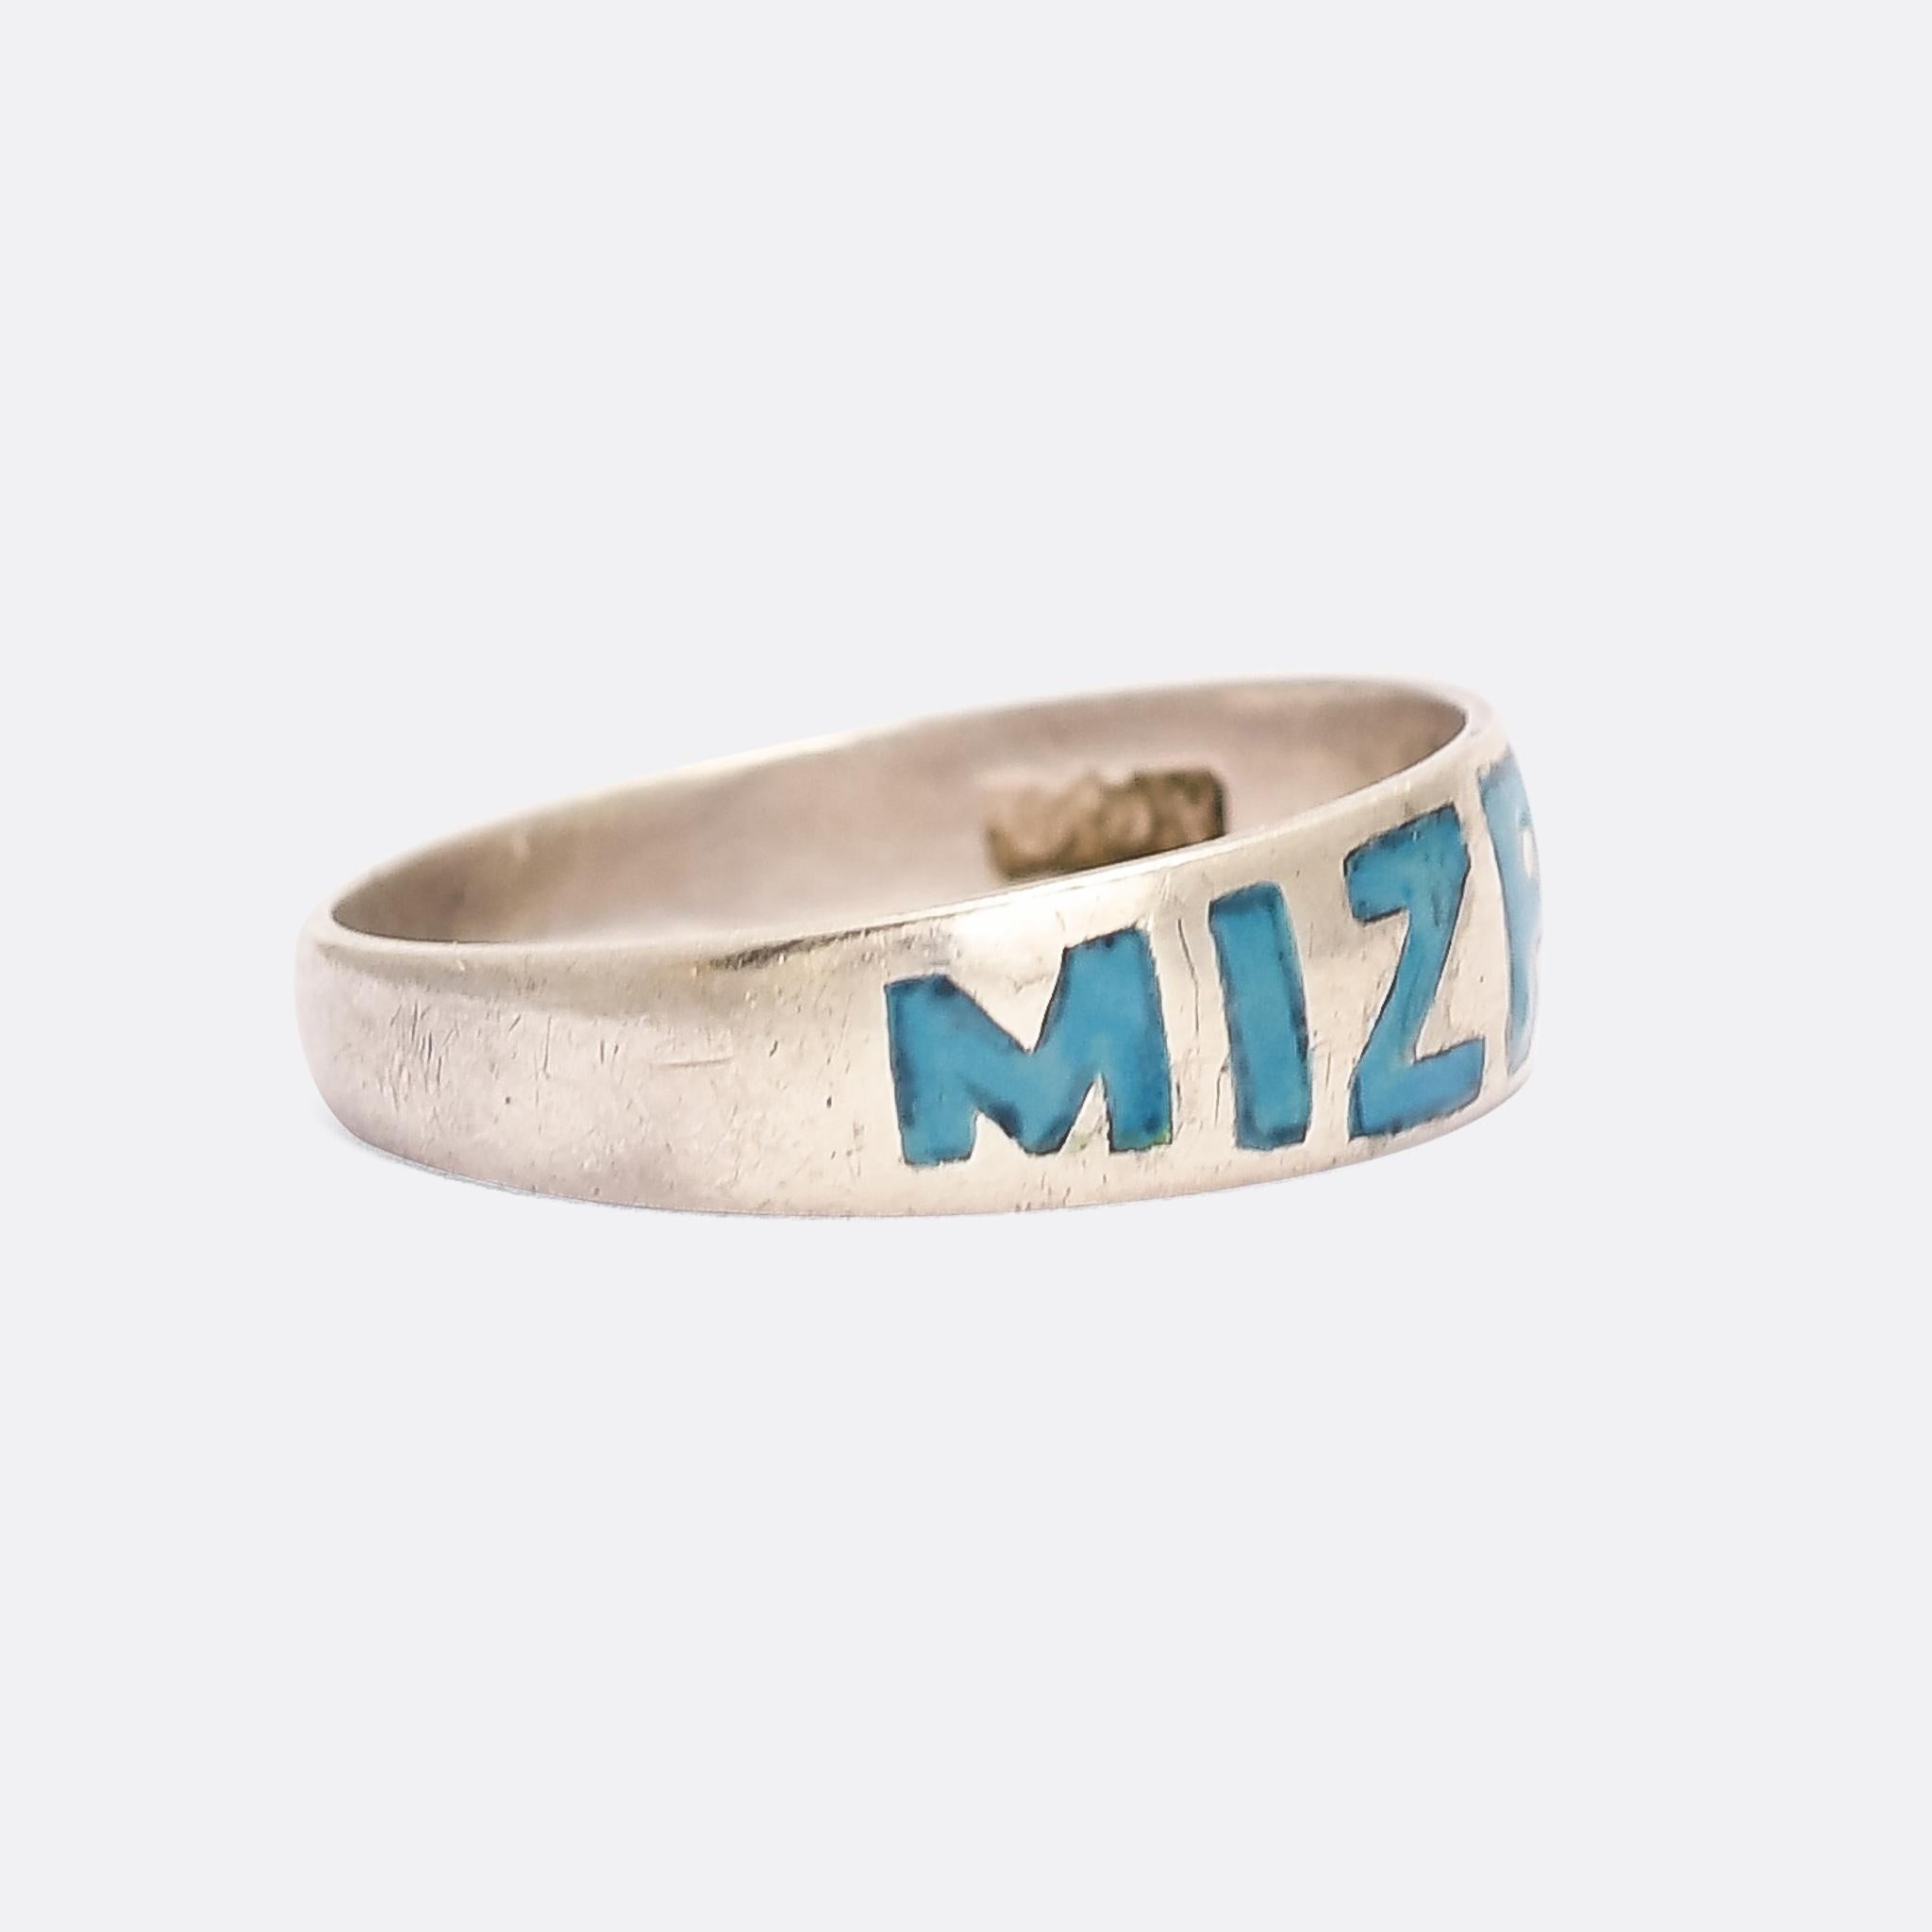 An unusual and quite charming antique MIZPAH ring dating from the late Victorian era, circa 1890. The lettering is big and bold, covering the whole width of the band, and finished in bright turquoise enamel. It's crafted in sterling silver, with